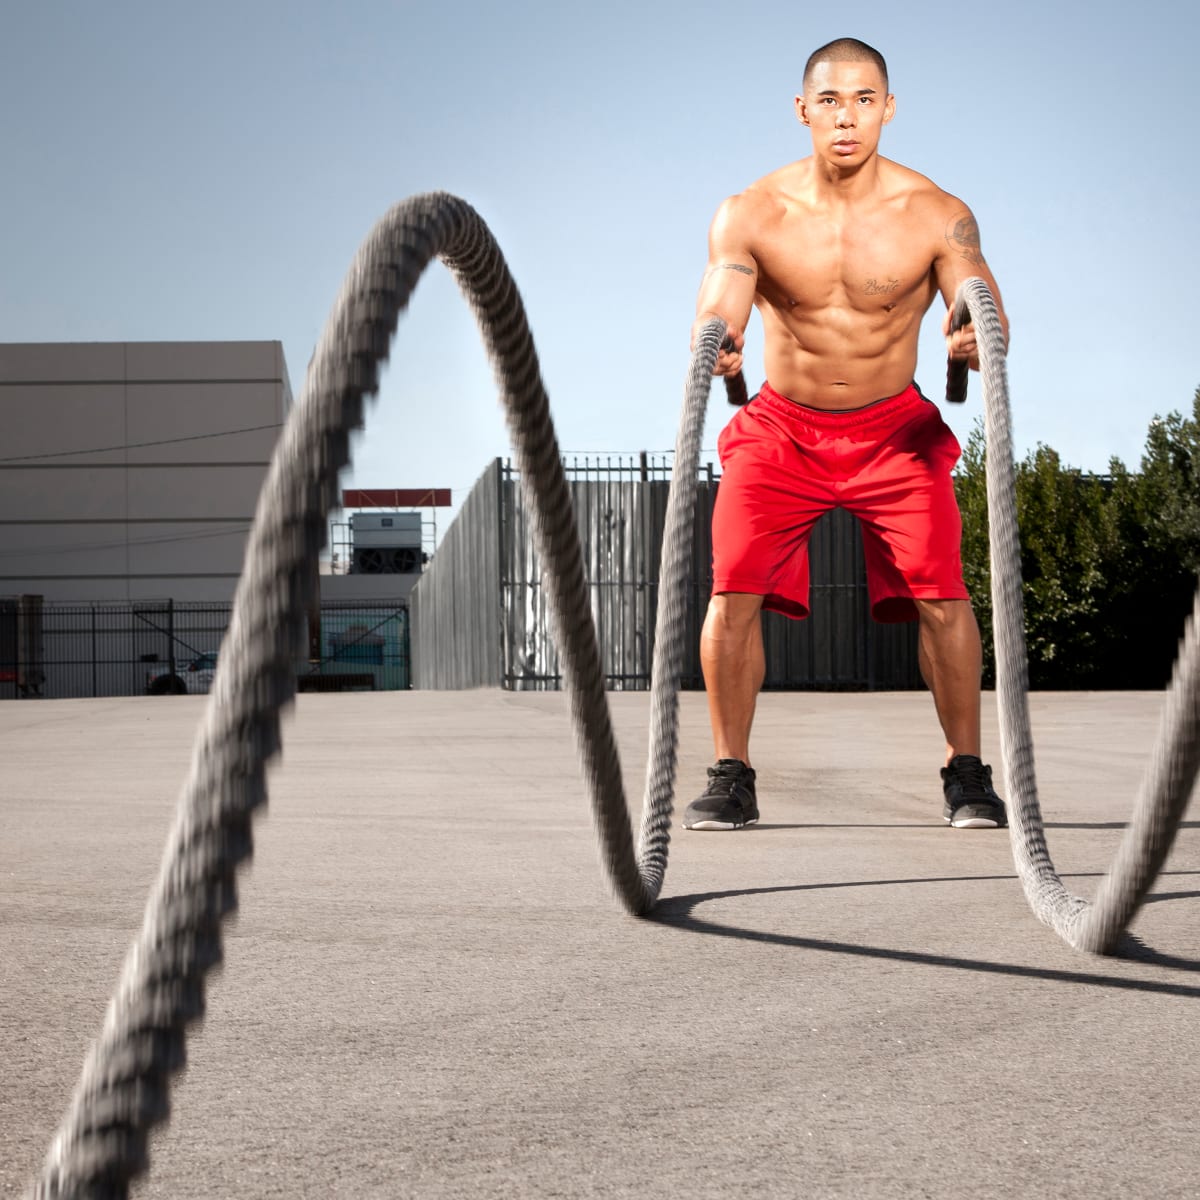 Battle Rope Workouts – Add Rope Training to Your Routine